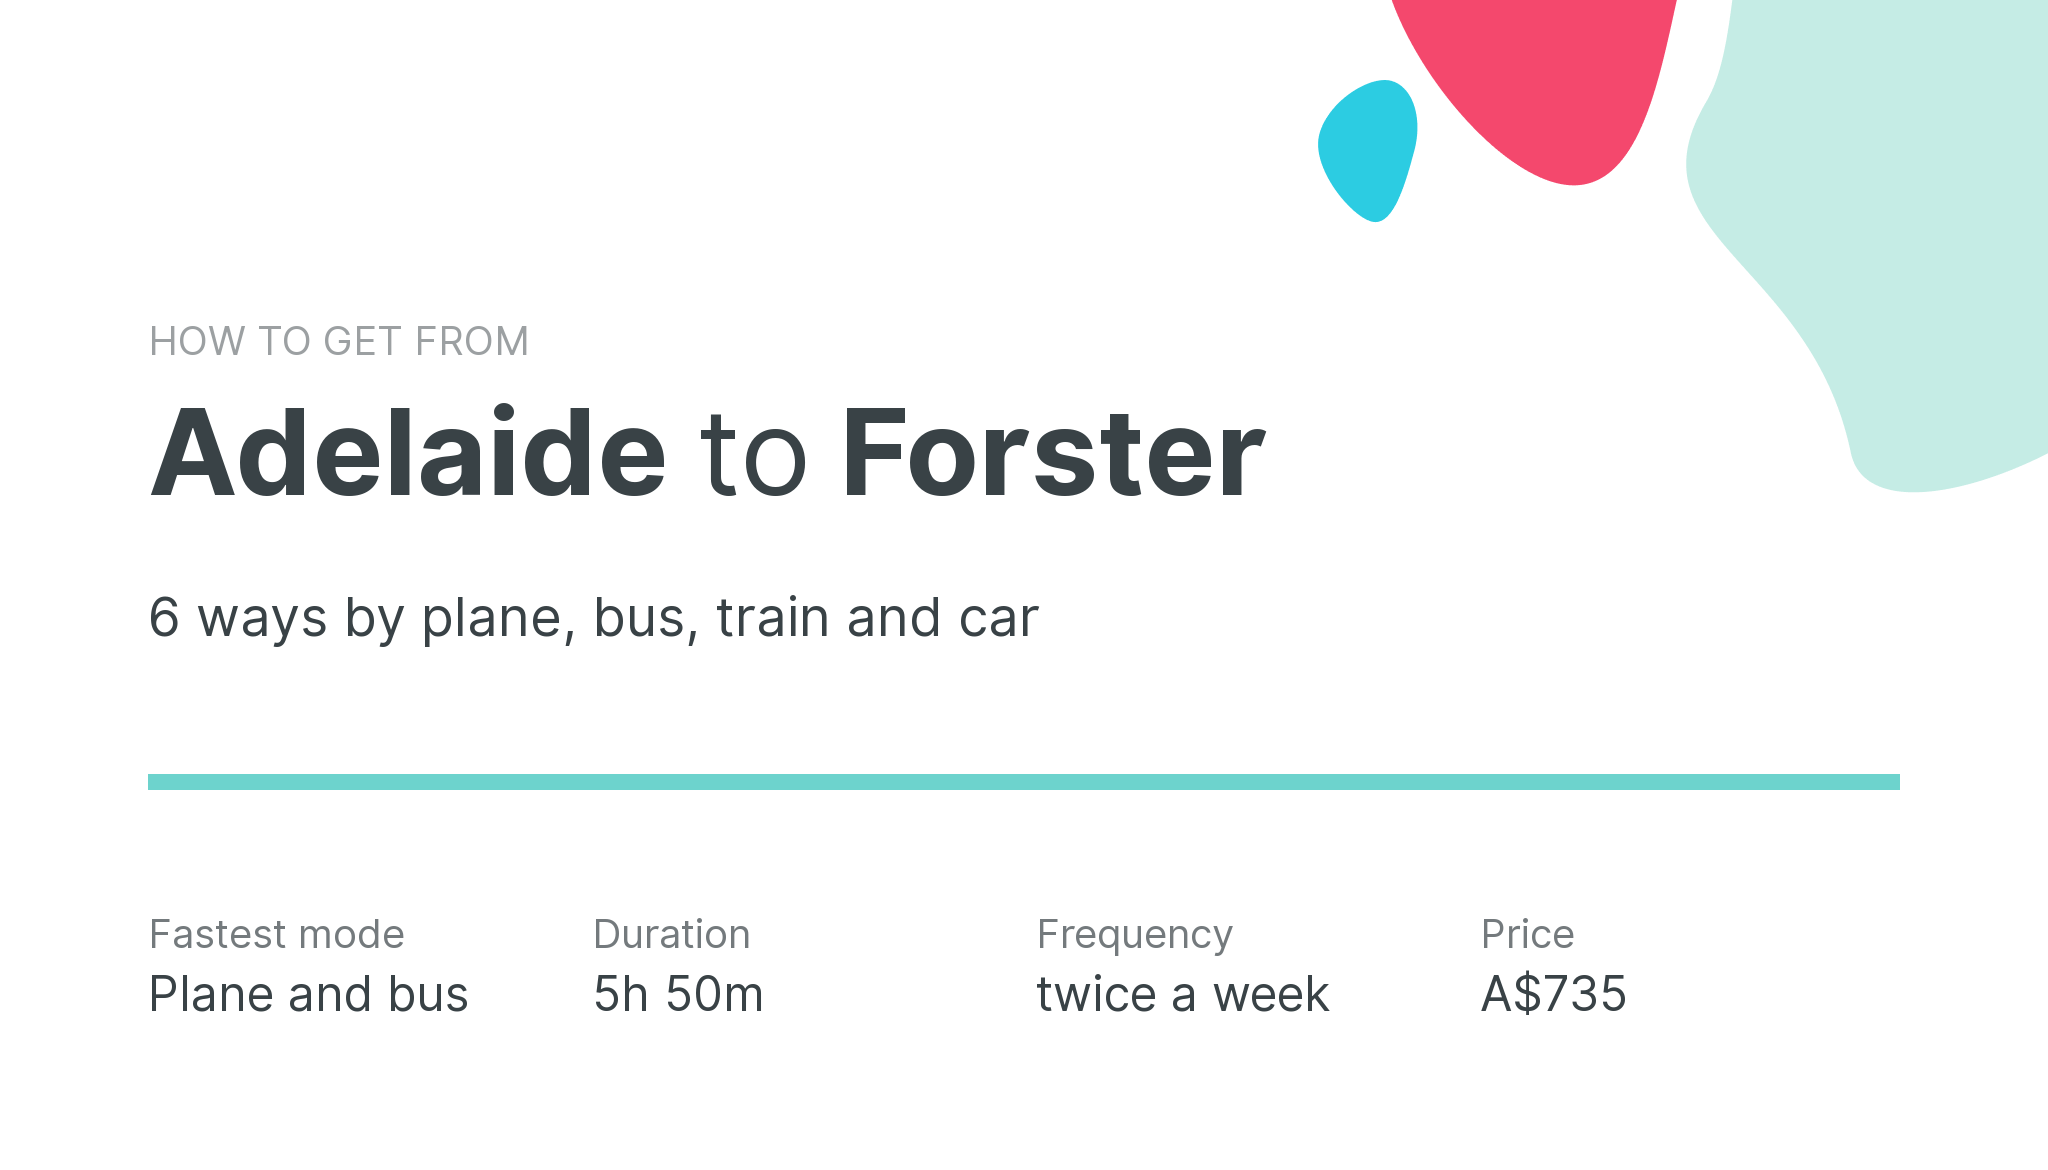 How do I get from Adelaide to Forster